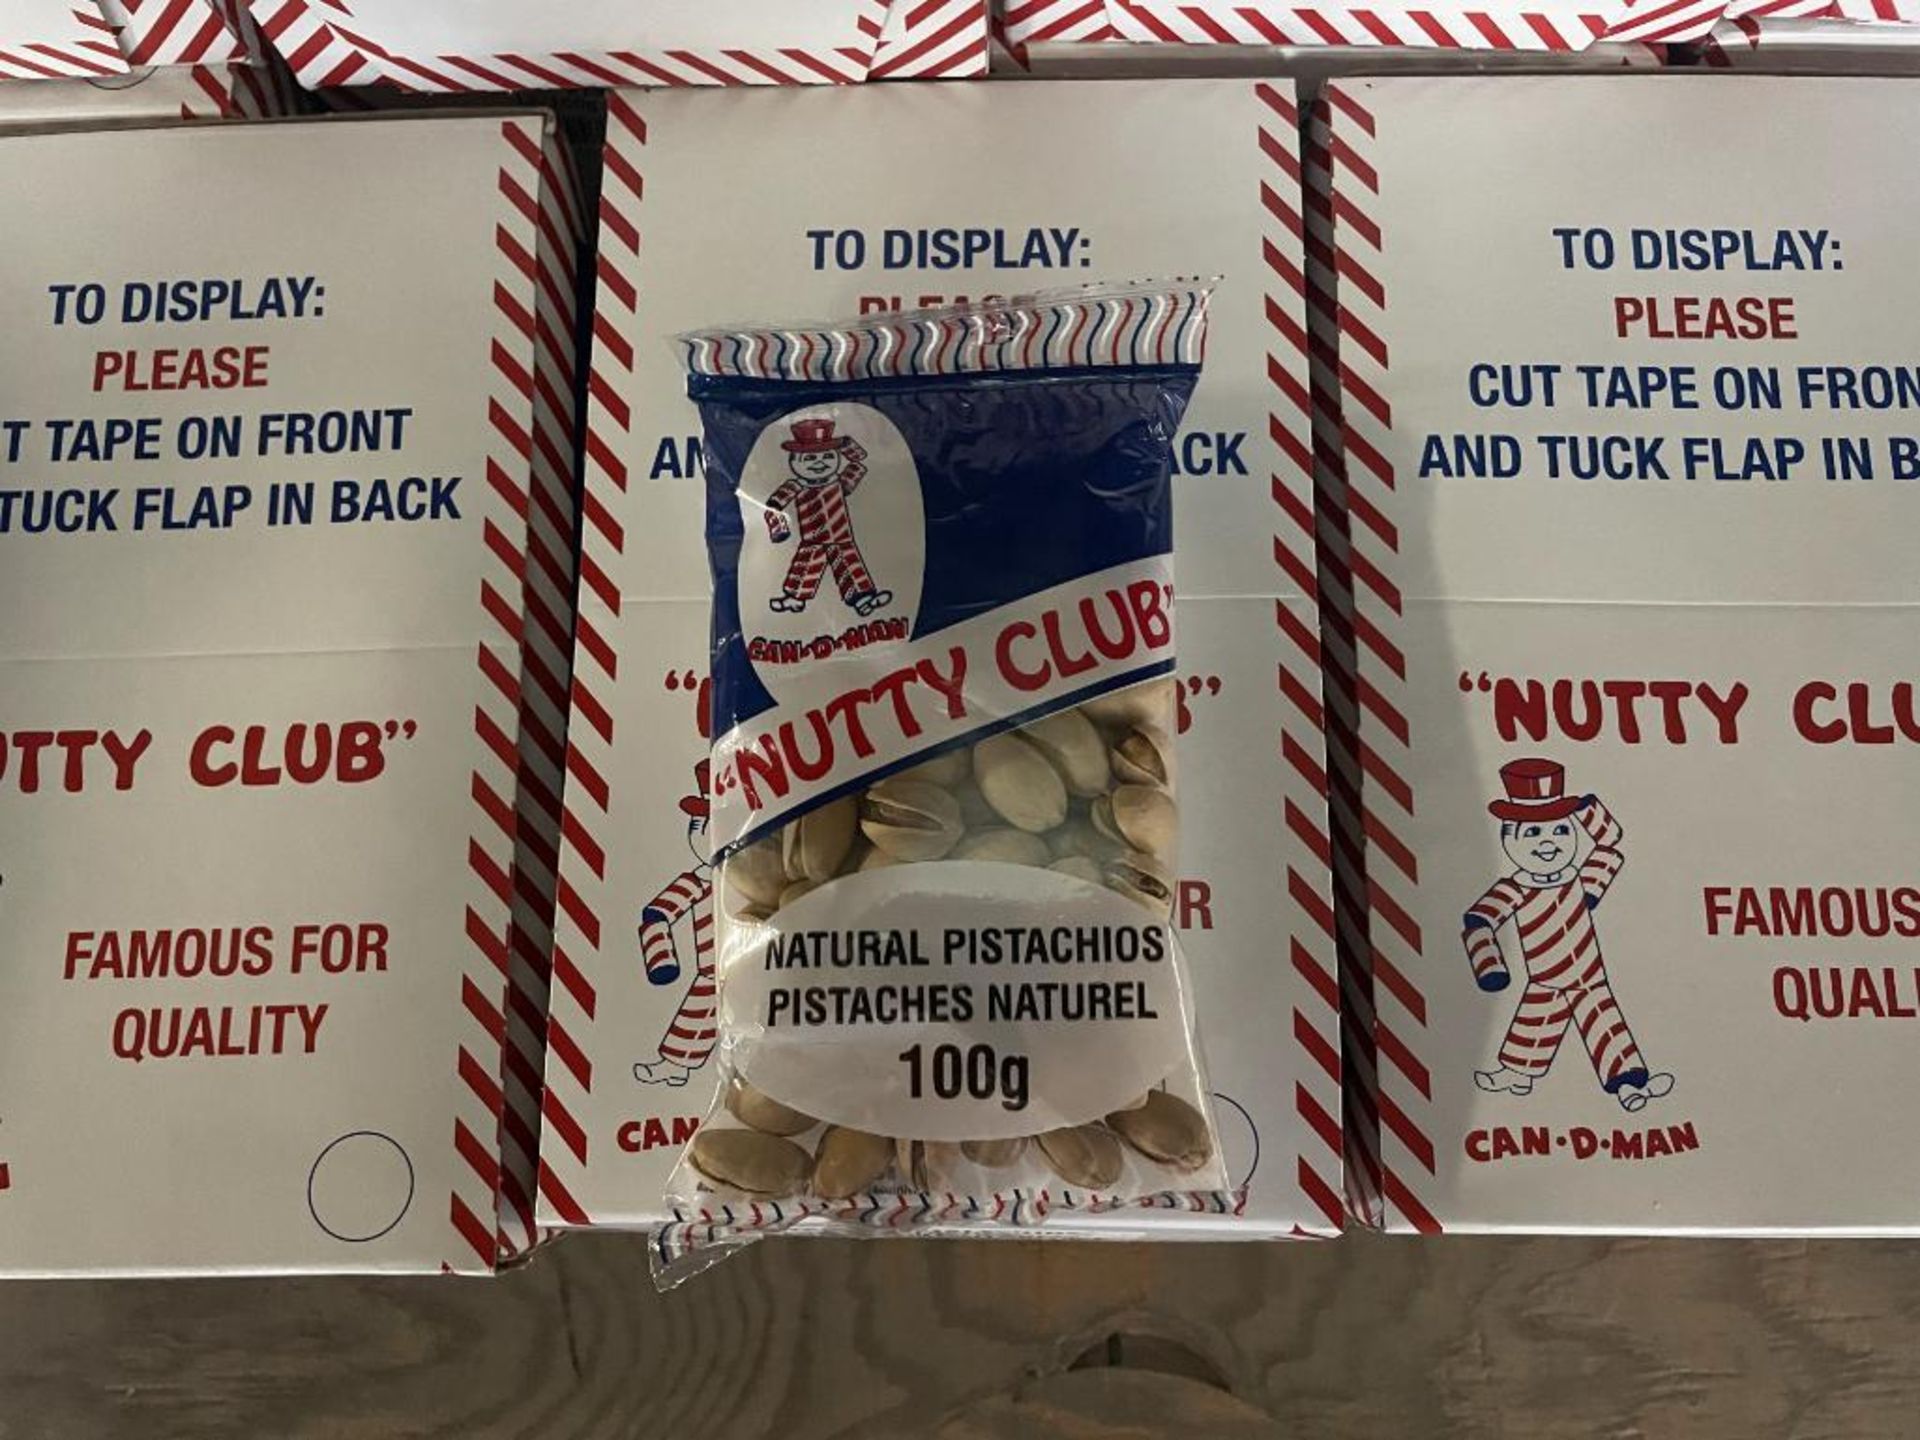 (11) BOXES OF NUTTY CLUB NATURAL PISTACHIOS, 12/100G PER BOX - Image 2 of 3